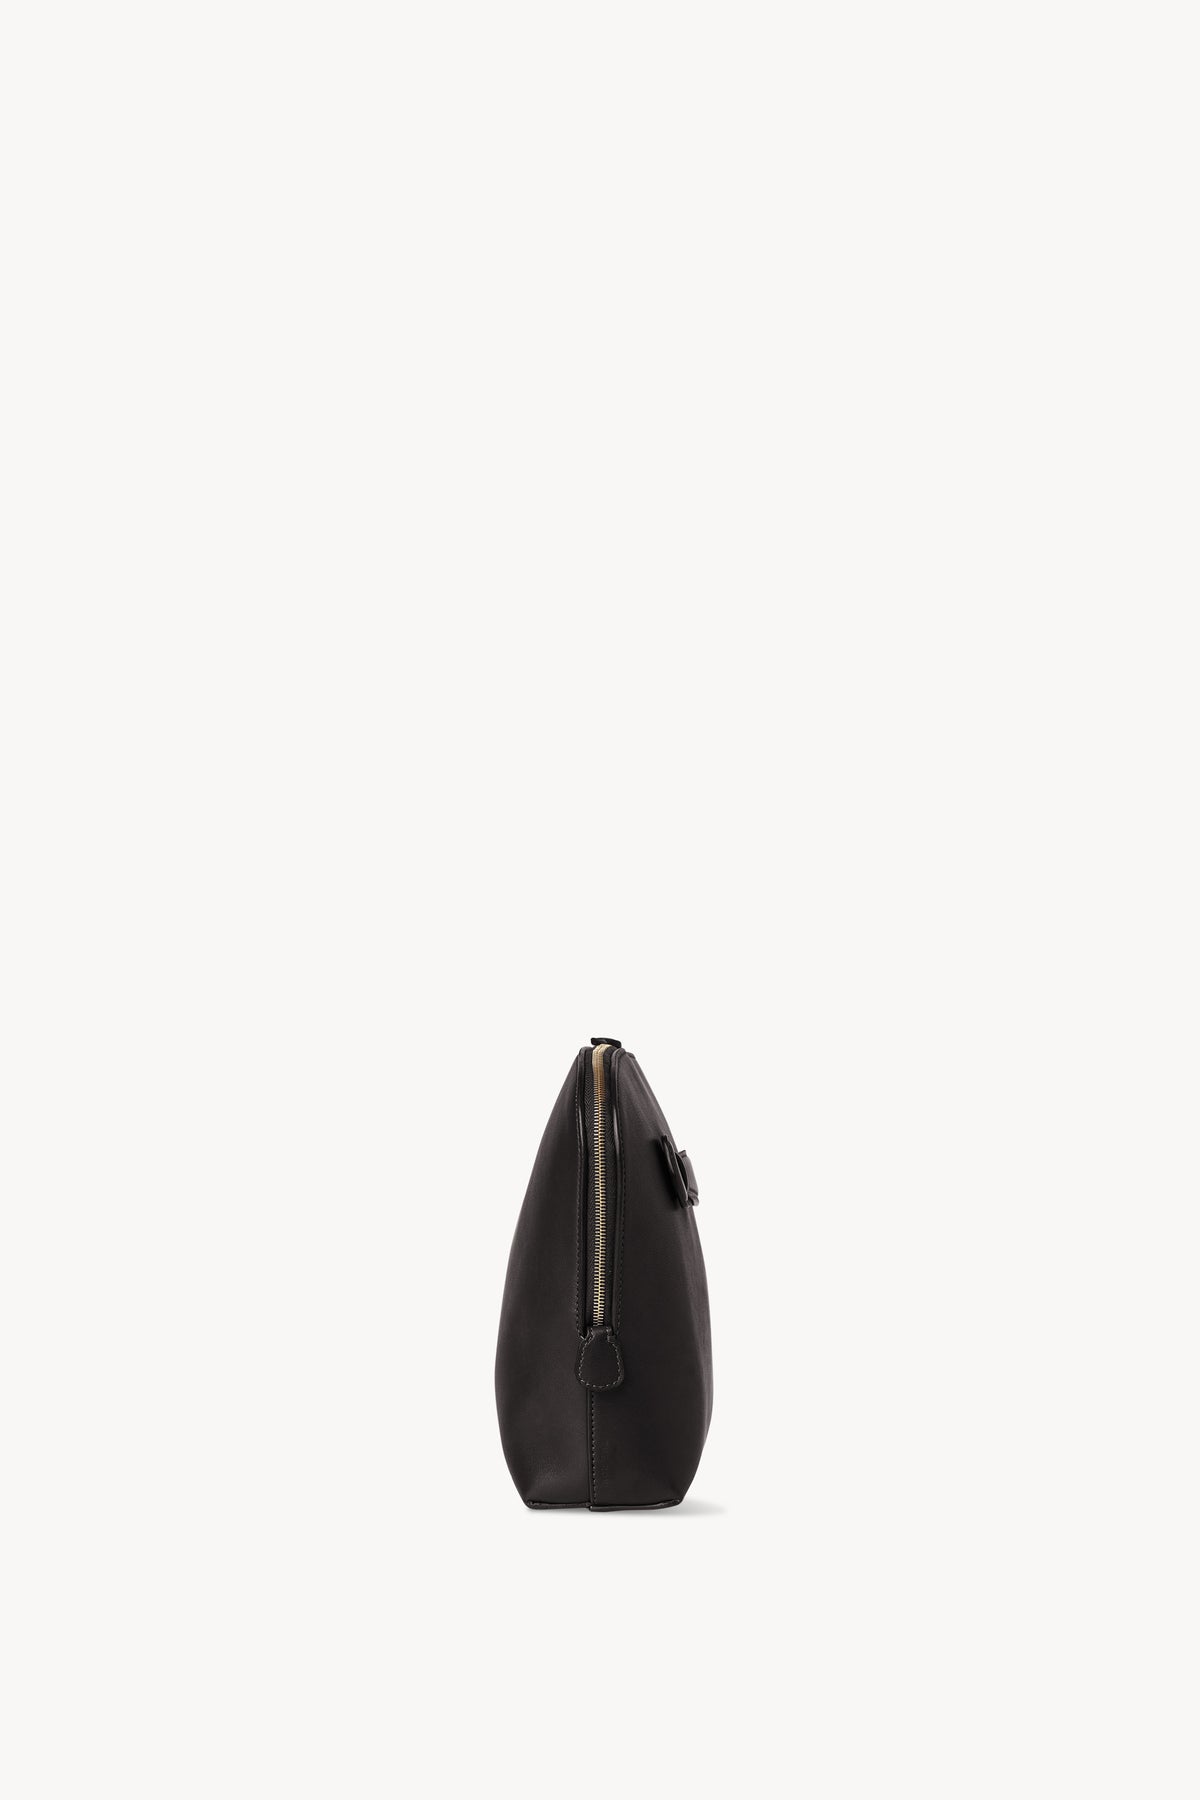 The Row Ellie Clutch Bag in Saddle Leather